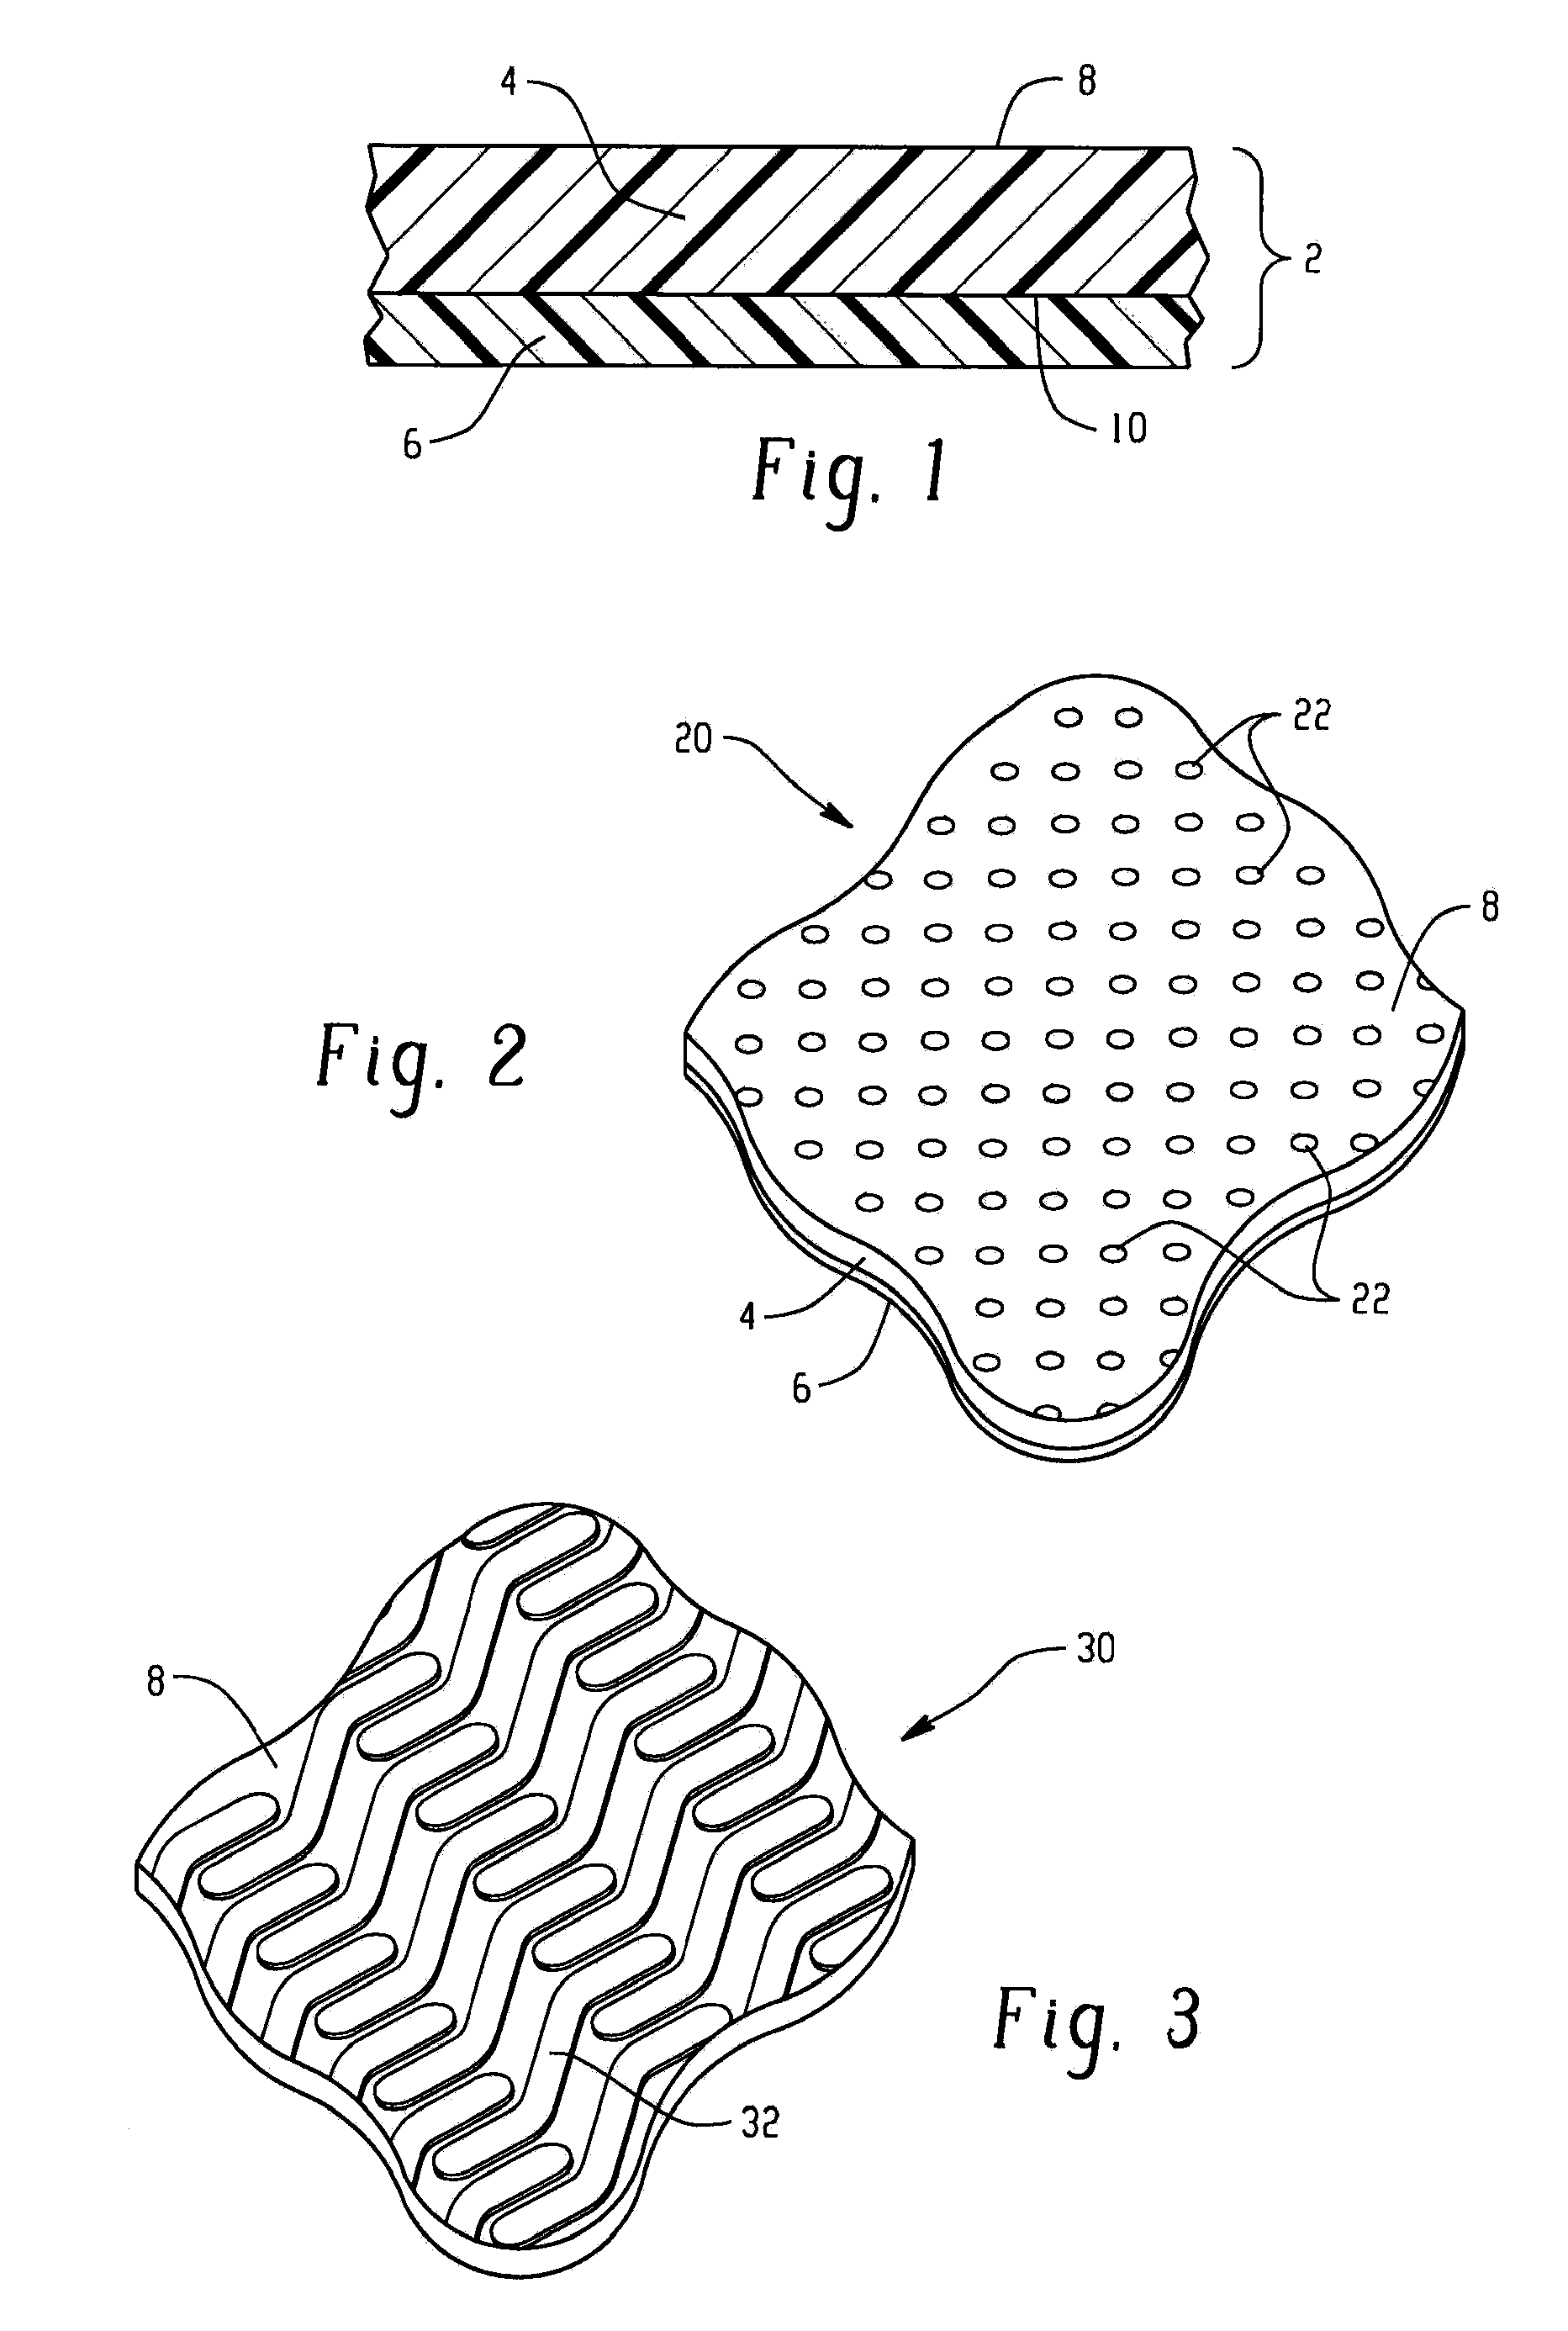 Silicone compositions, methods of manufacture, and articles formed therefrom